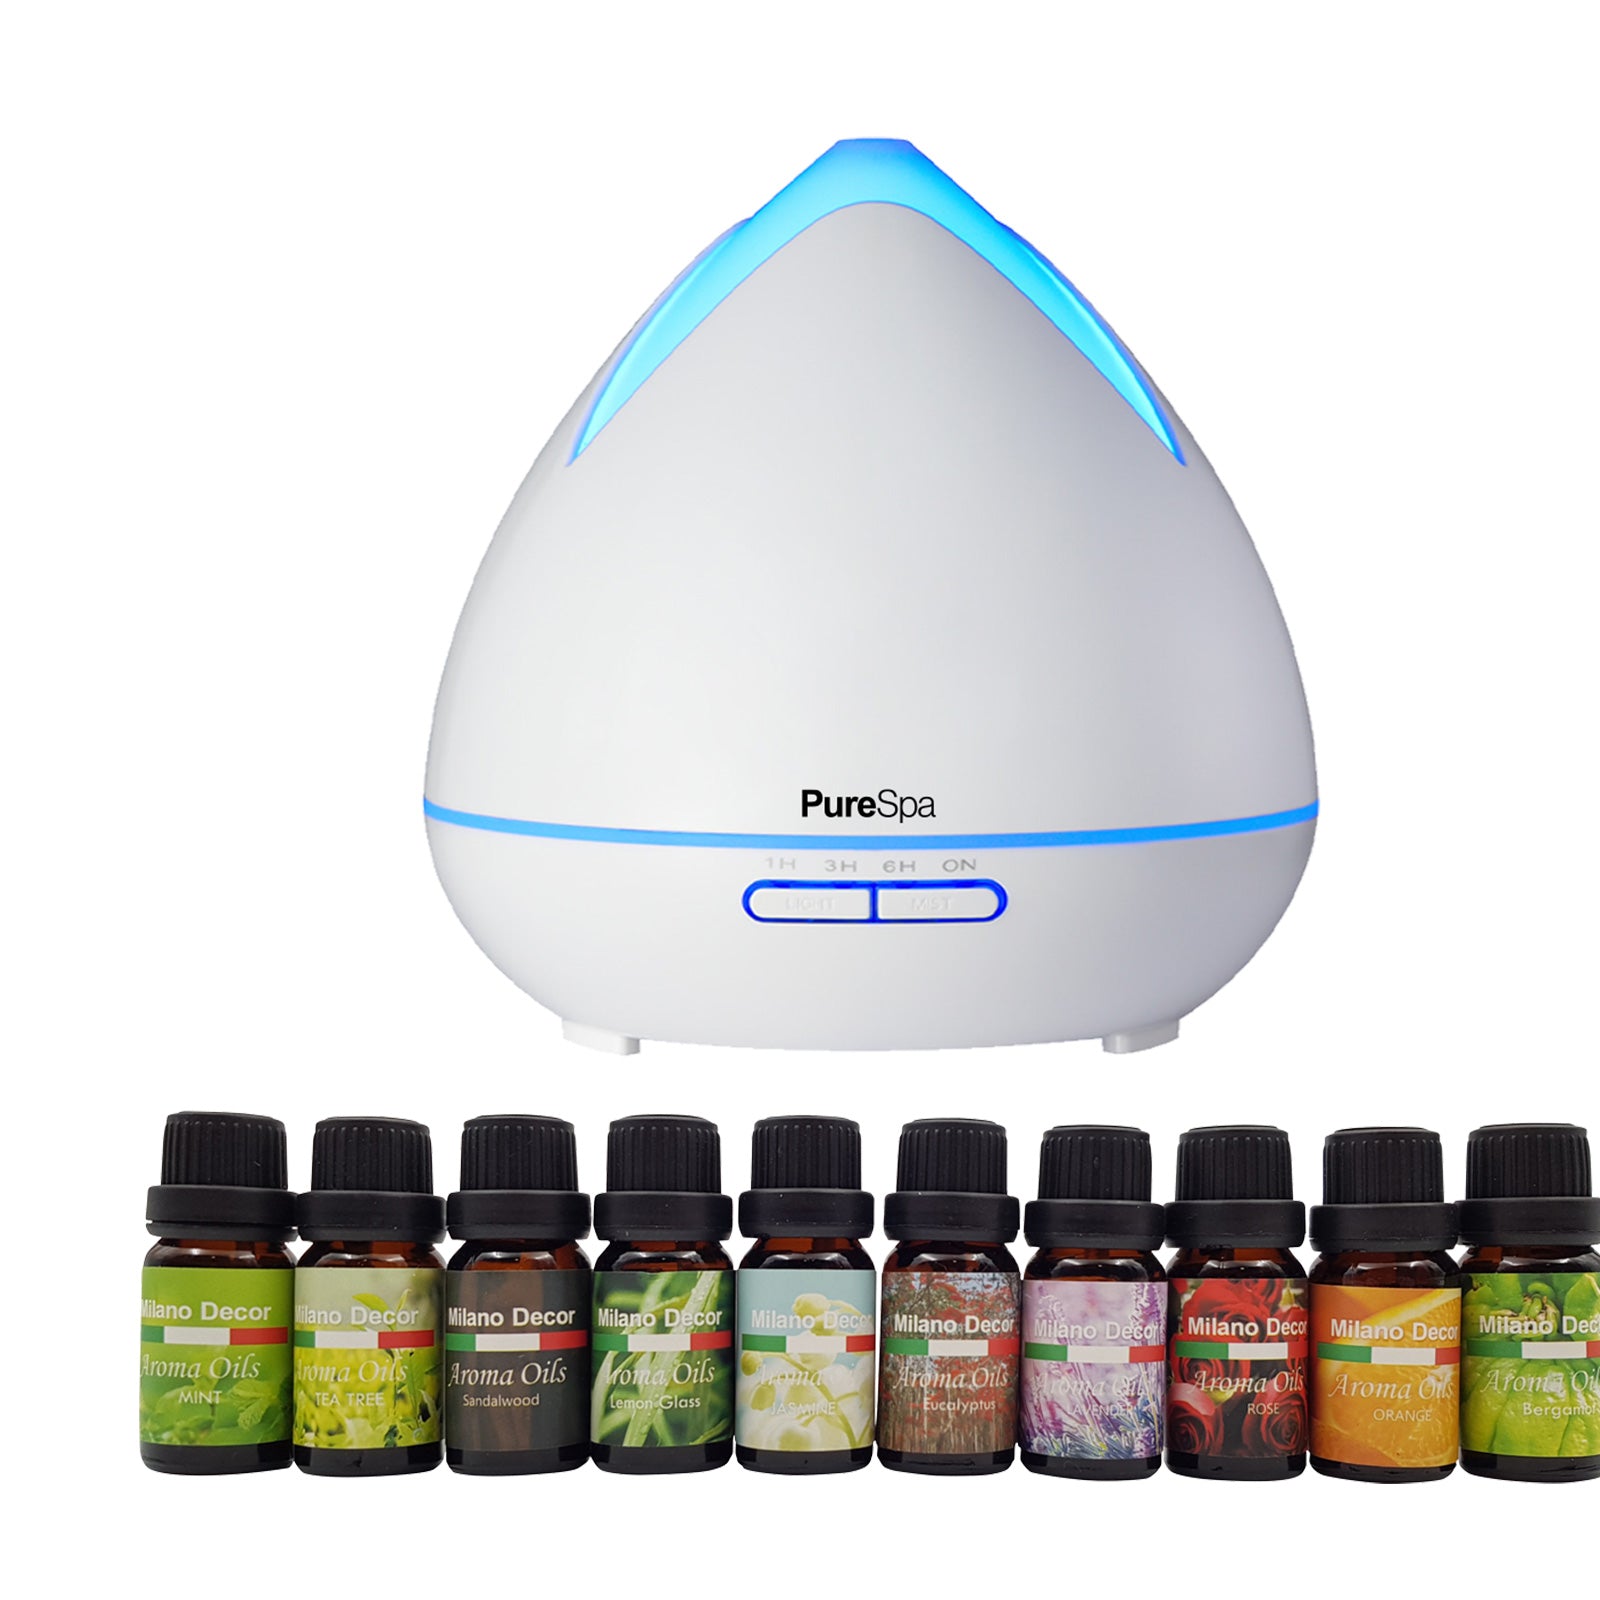 Purespa Diffuser Set With 10 Pack Diffuser Oils Humidifier Aromatherapy - White - SILBERSHELL